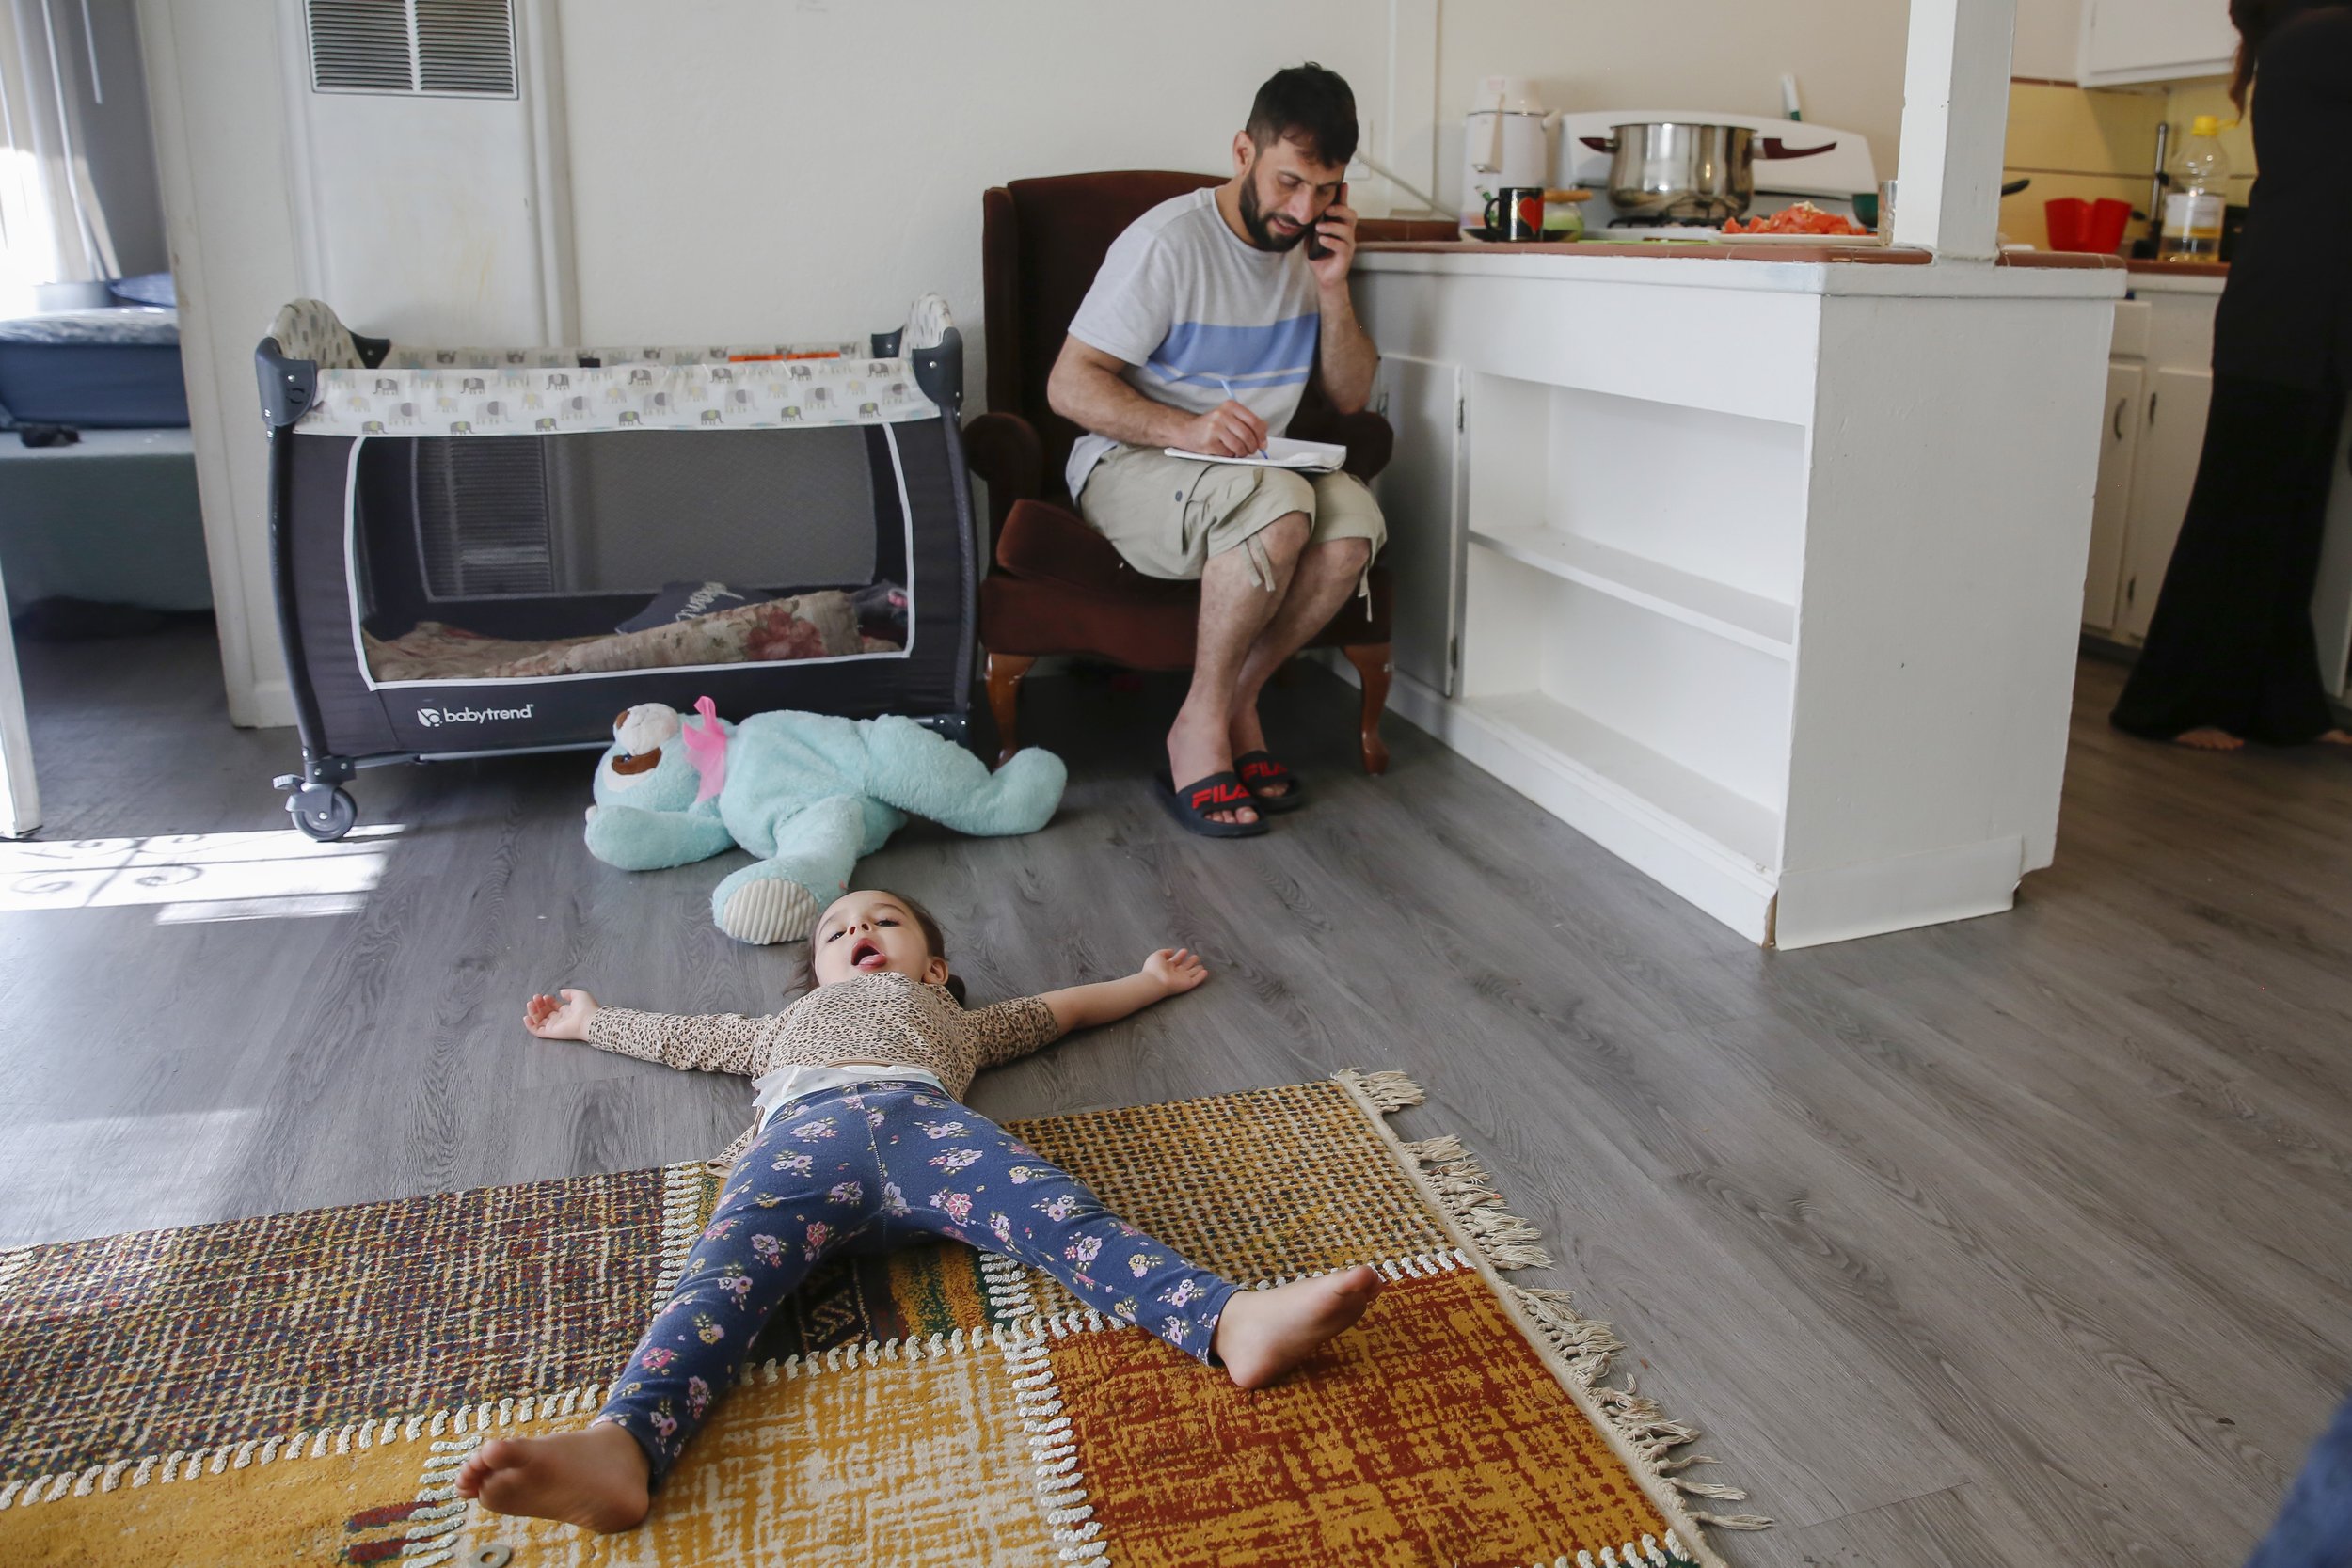  Najibullah Mohammadi talks with a friend on the phone who is helping him register for classes at the local community college, while his daughter Zahra lays on the floor and his wife Susan cooks lunch at their home in Sacramento, Calif. on Tuesday, M